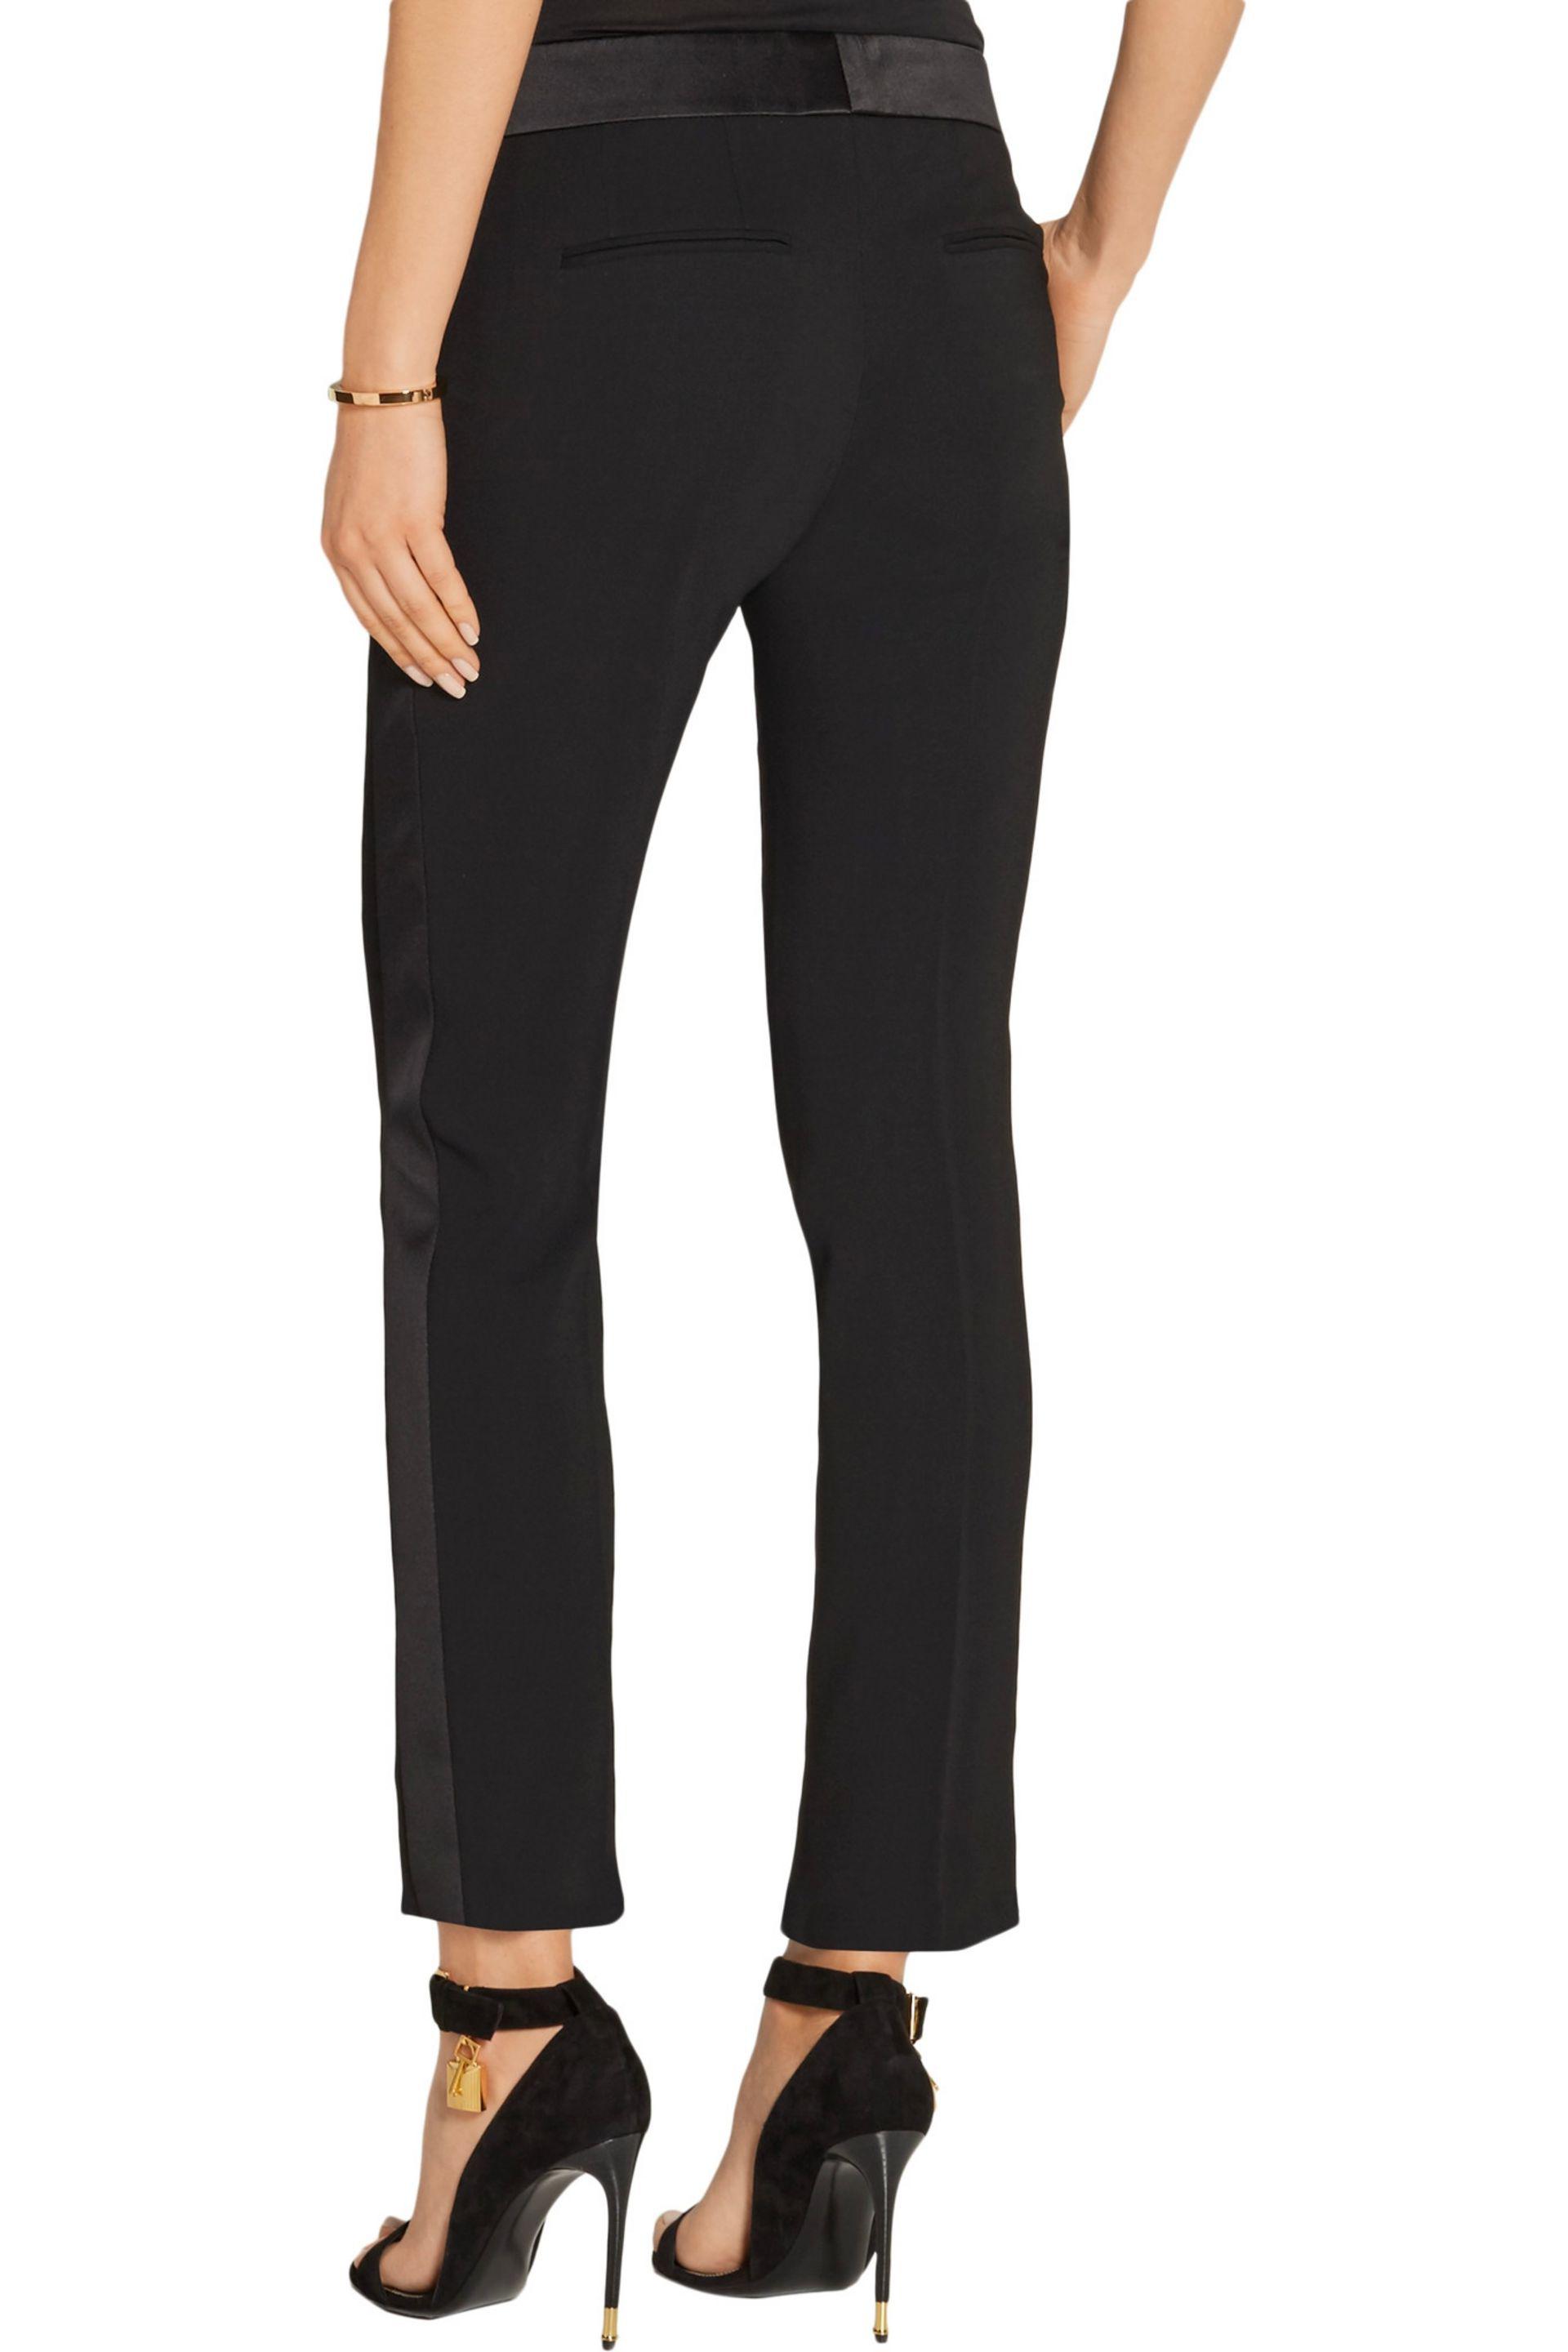 Lyst - Tom Ford Satin-trimmed Stretch-cady Straight-leg Tuxedo Pants in ...